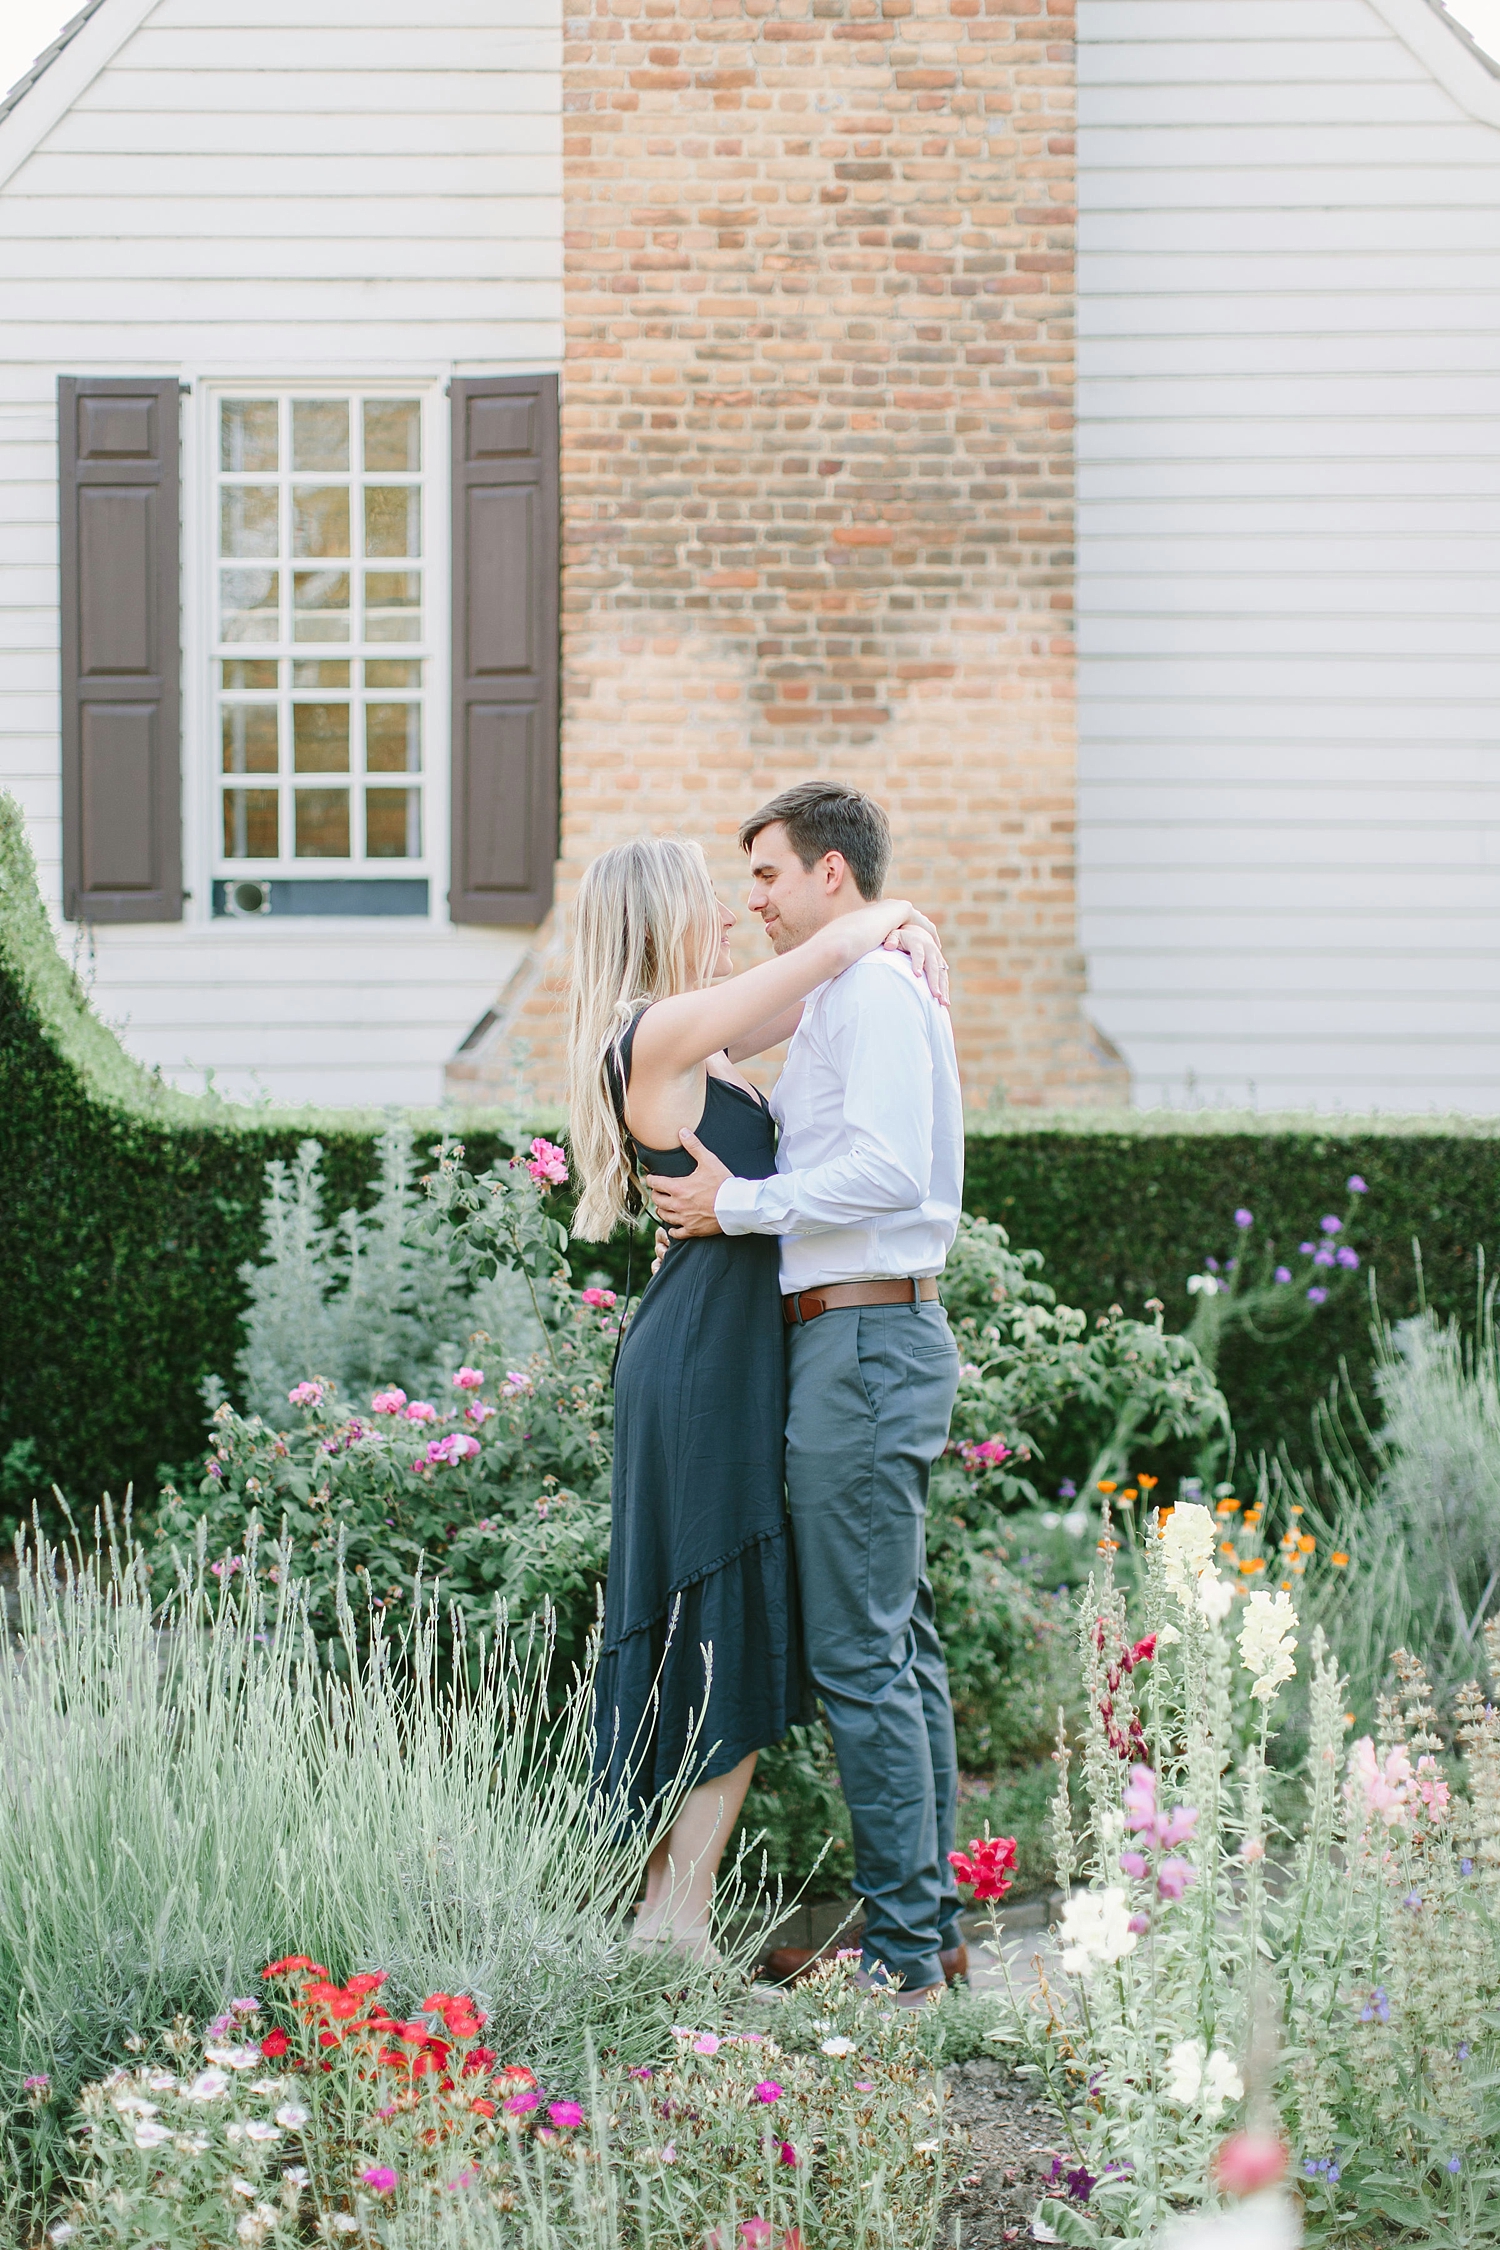 Couple embracing in a garden in colonial williamsburg